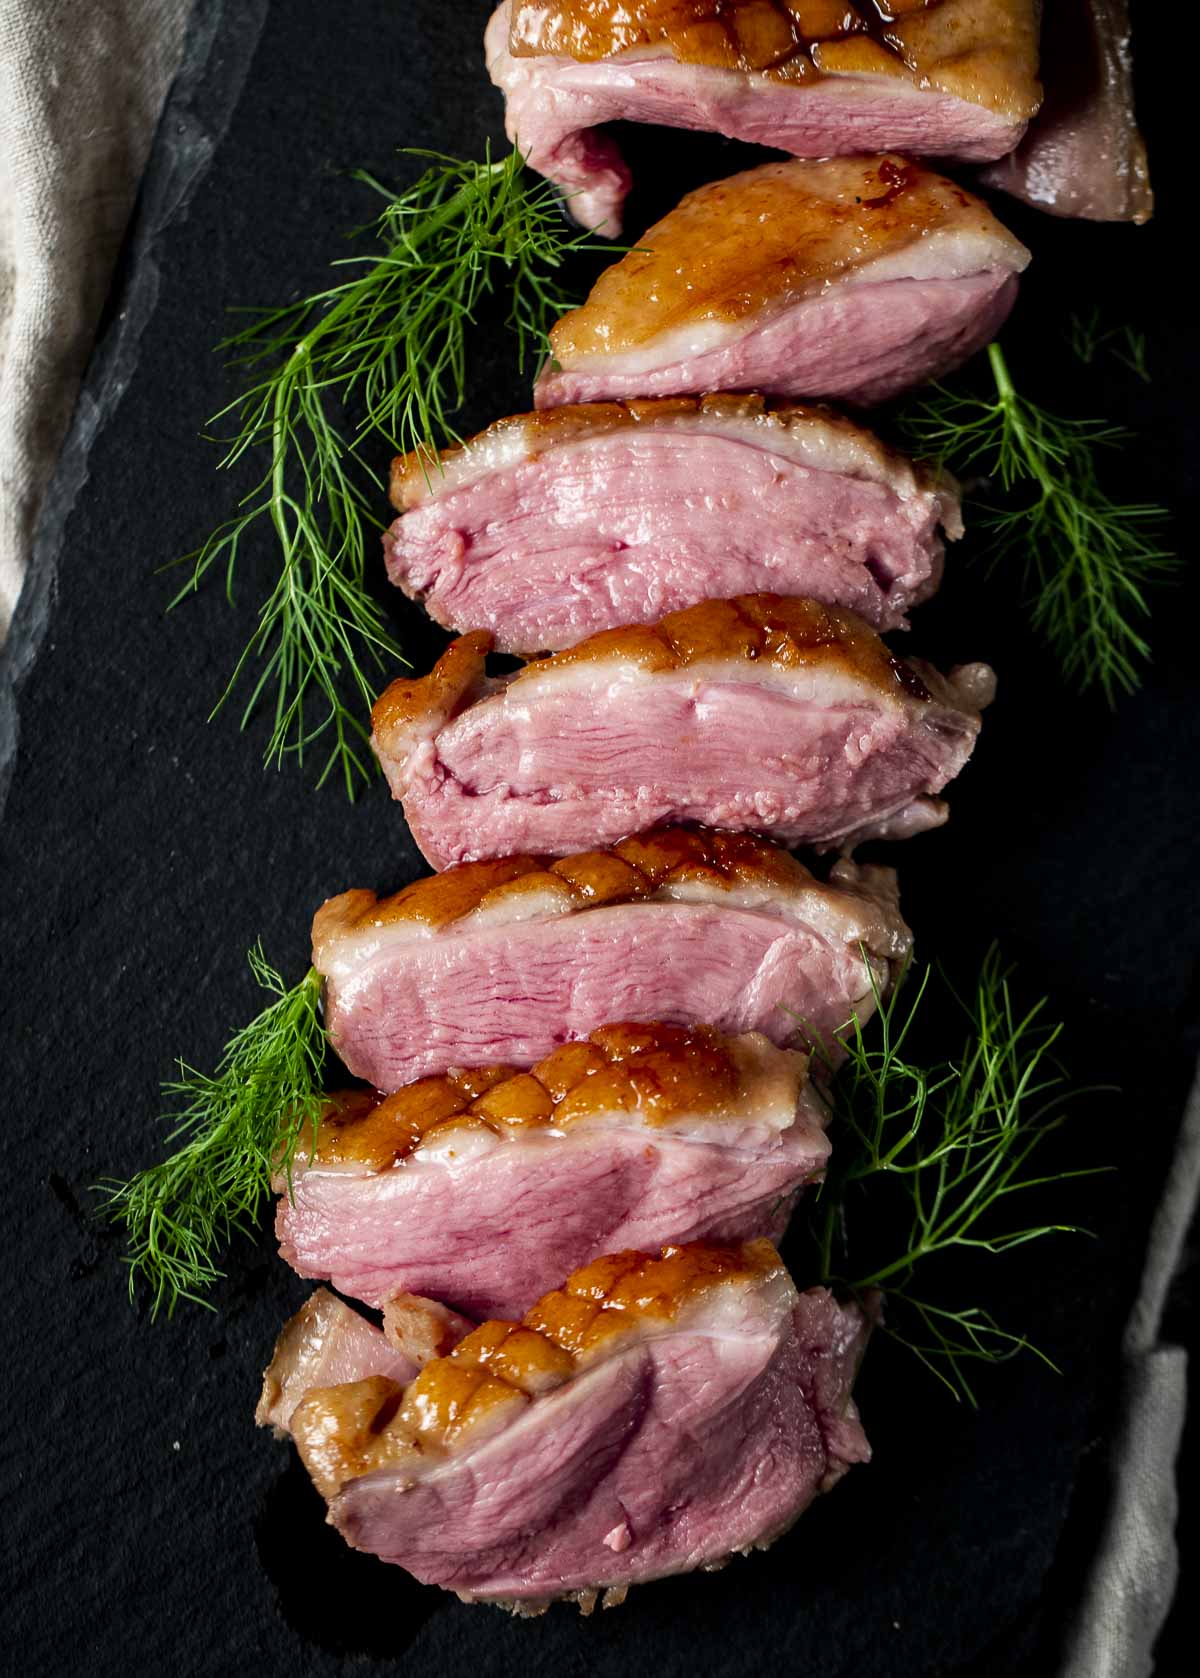 Sliced sous vide duck breasts.